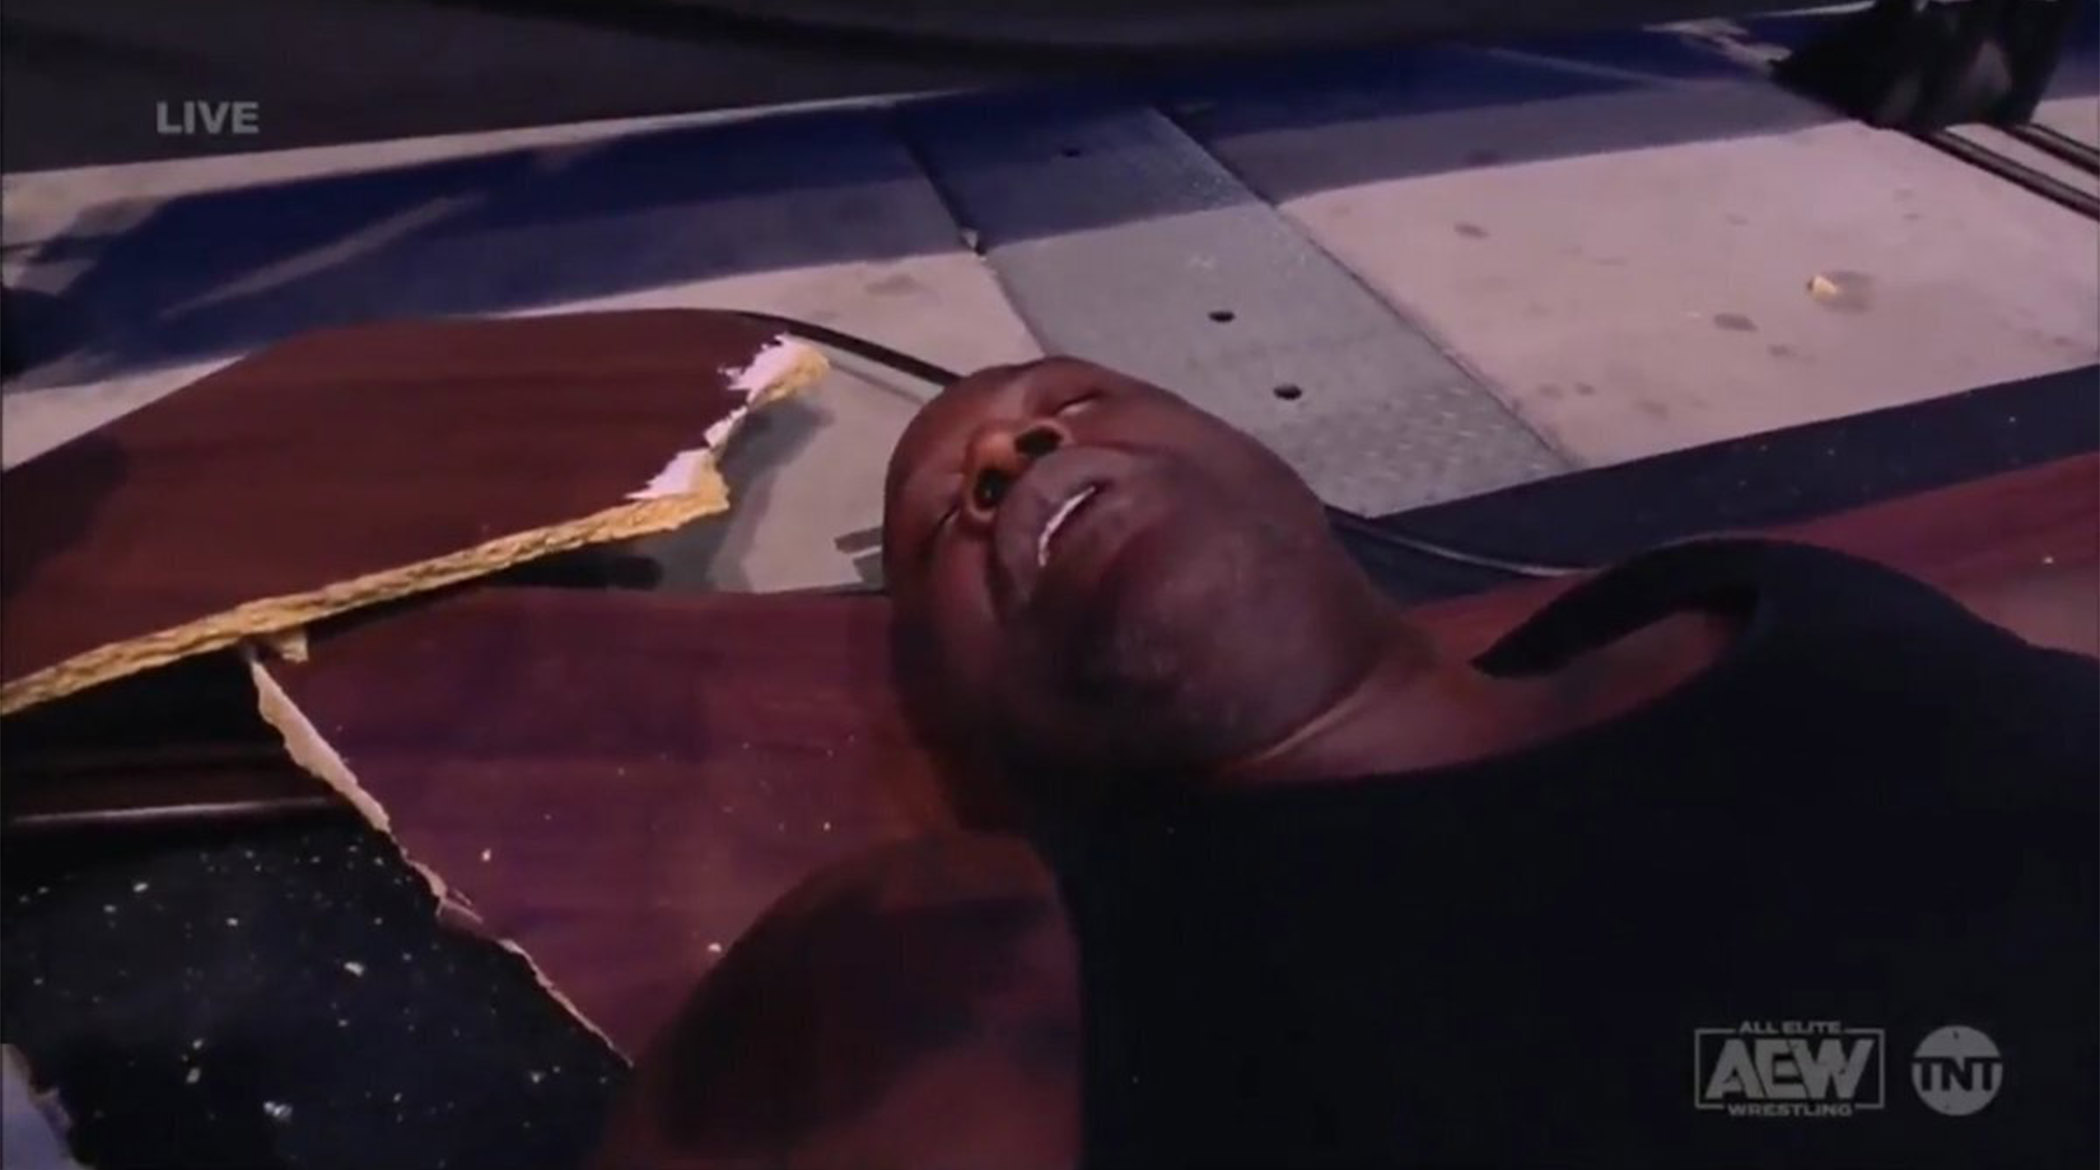 Shaq is knocked out at the debut of AEW Dynamite